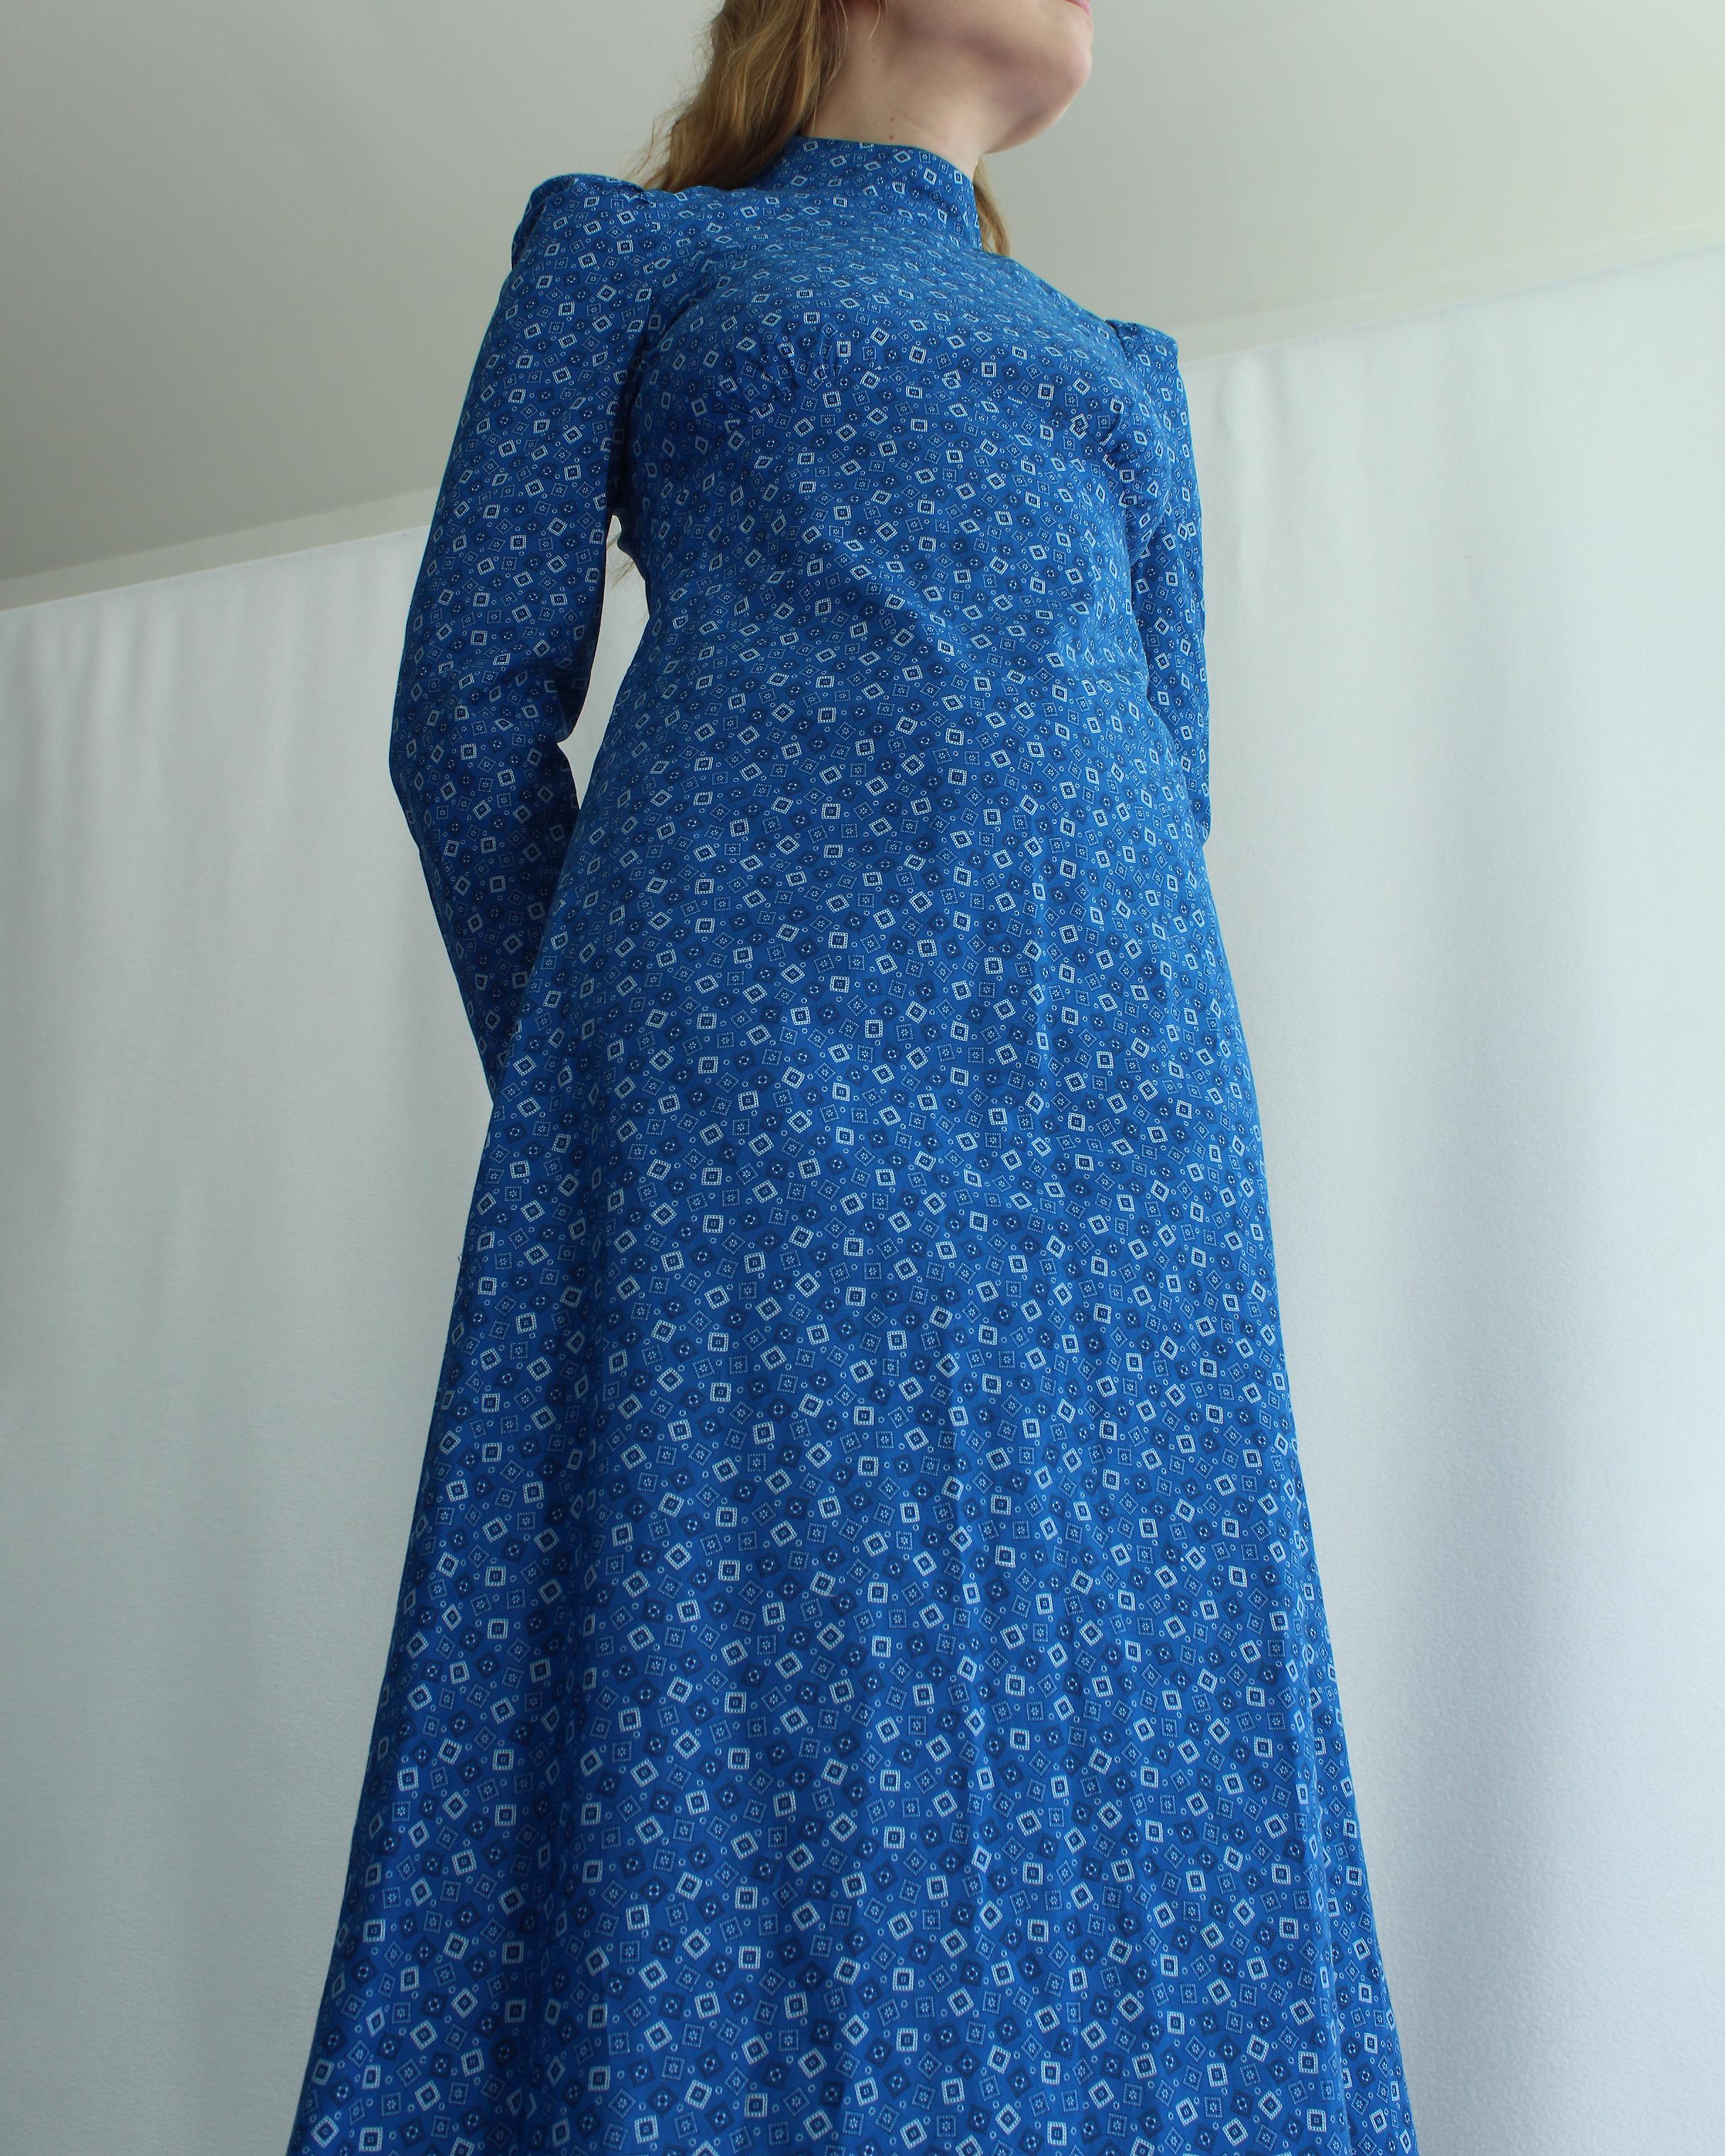 VERY BREEZY presents: This deadstock vintage 1960s cobalt calico dress draws inspiration from Victorian wrapper dresses, creating a romantic bohemian look. It features a mock neck and empire waist— would be great for an early maternity dress! The